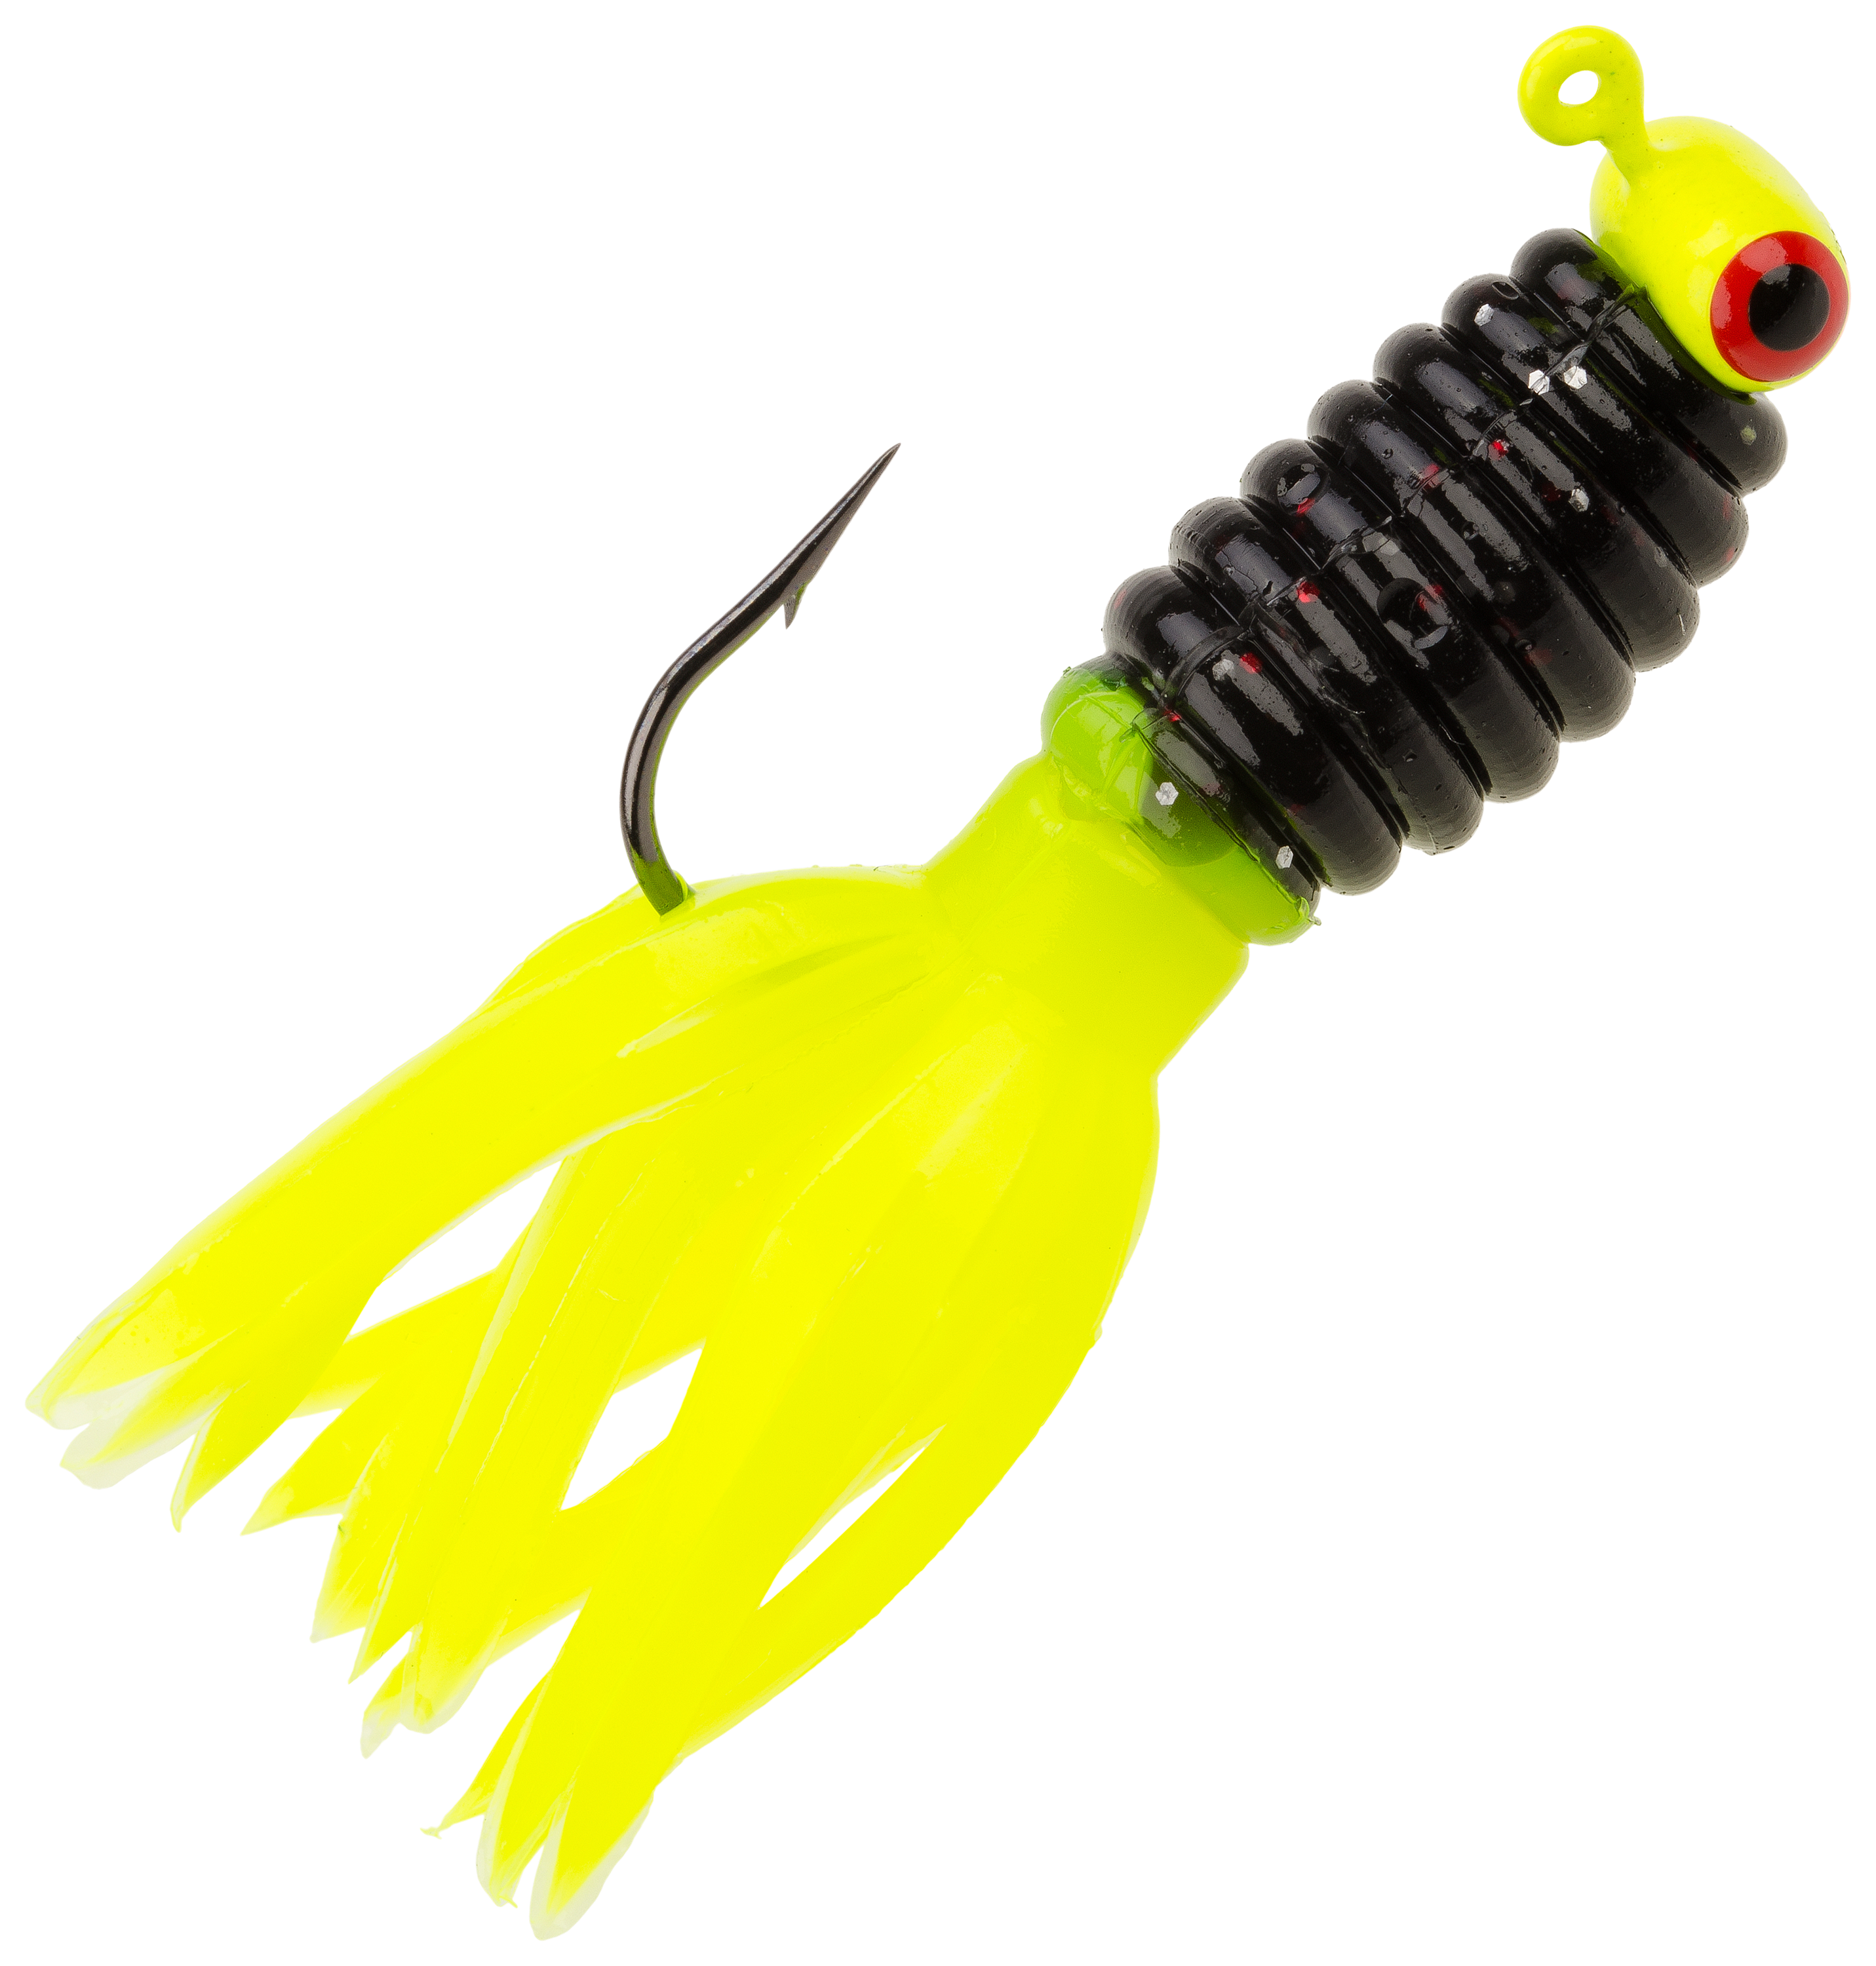 Mr. Crappie Thunder Spincasting Rod and Reel Combo